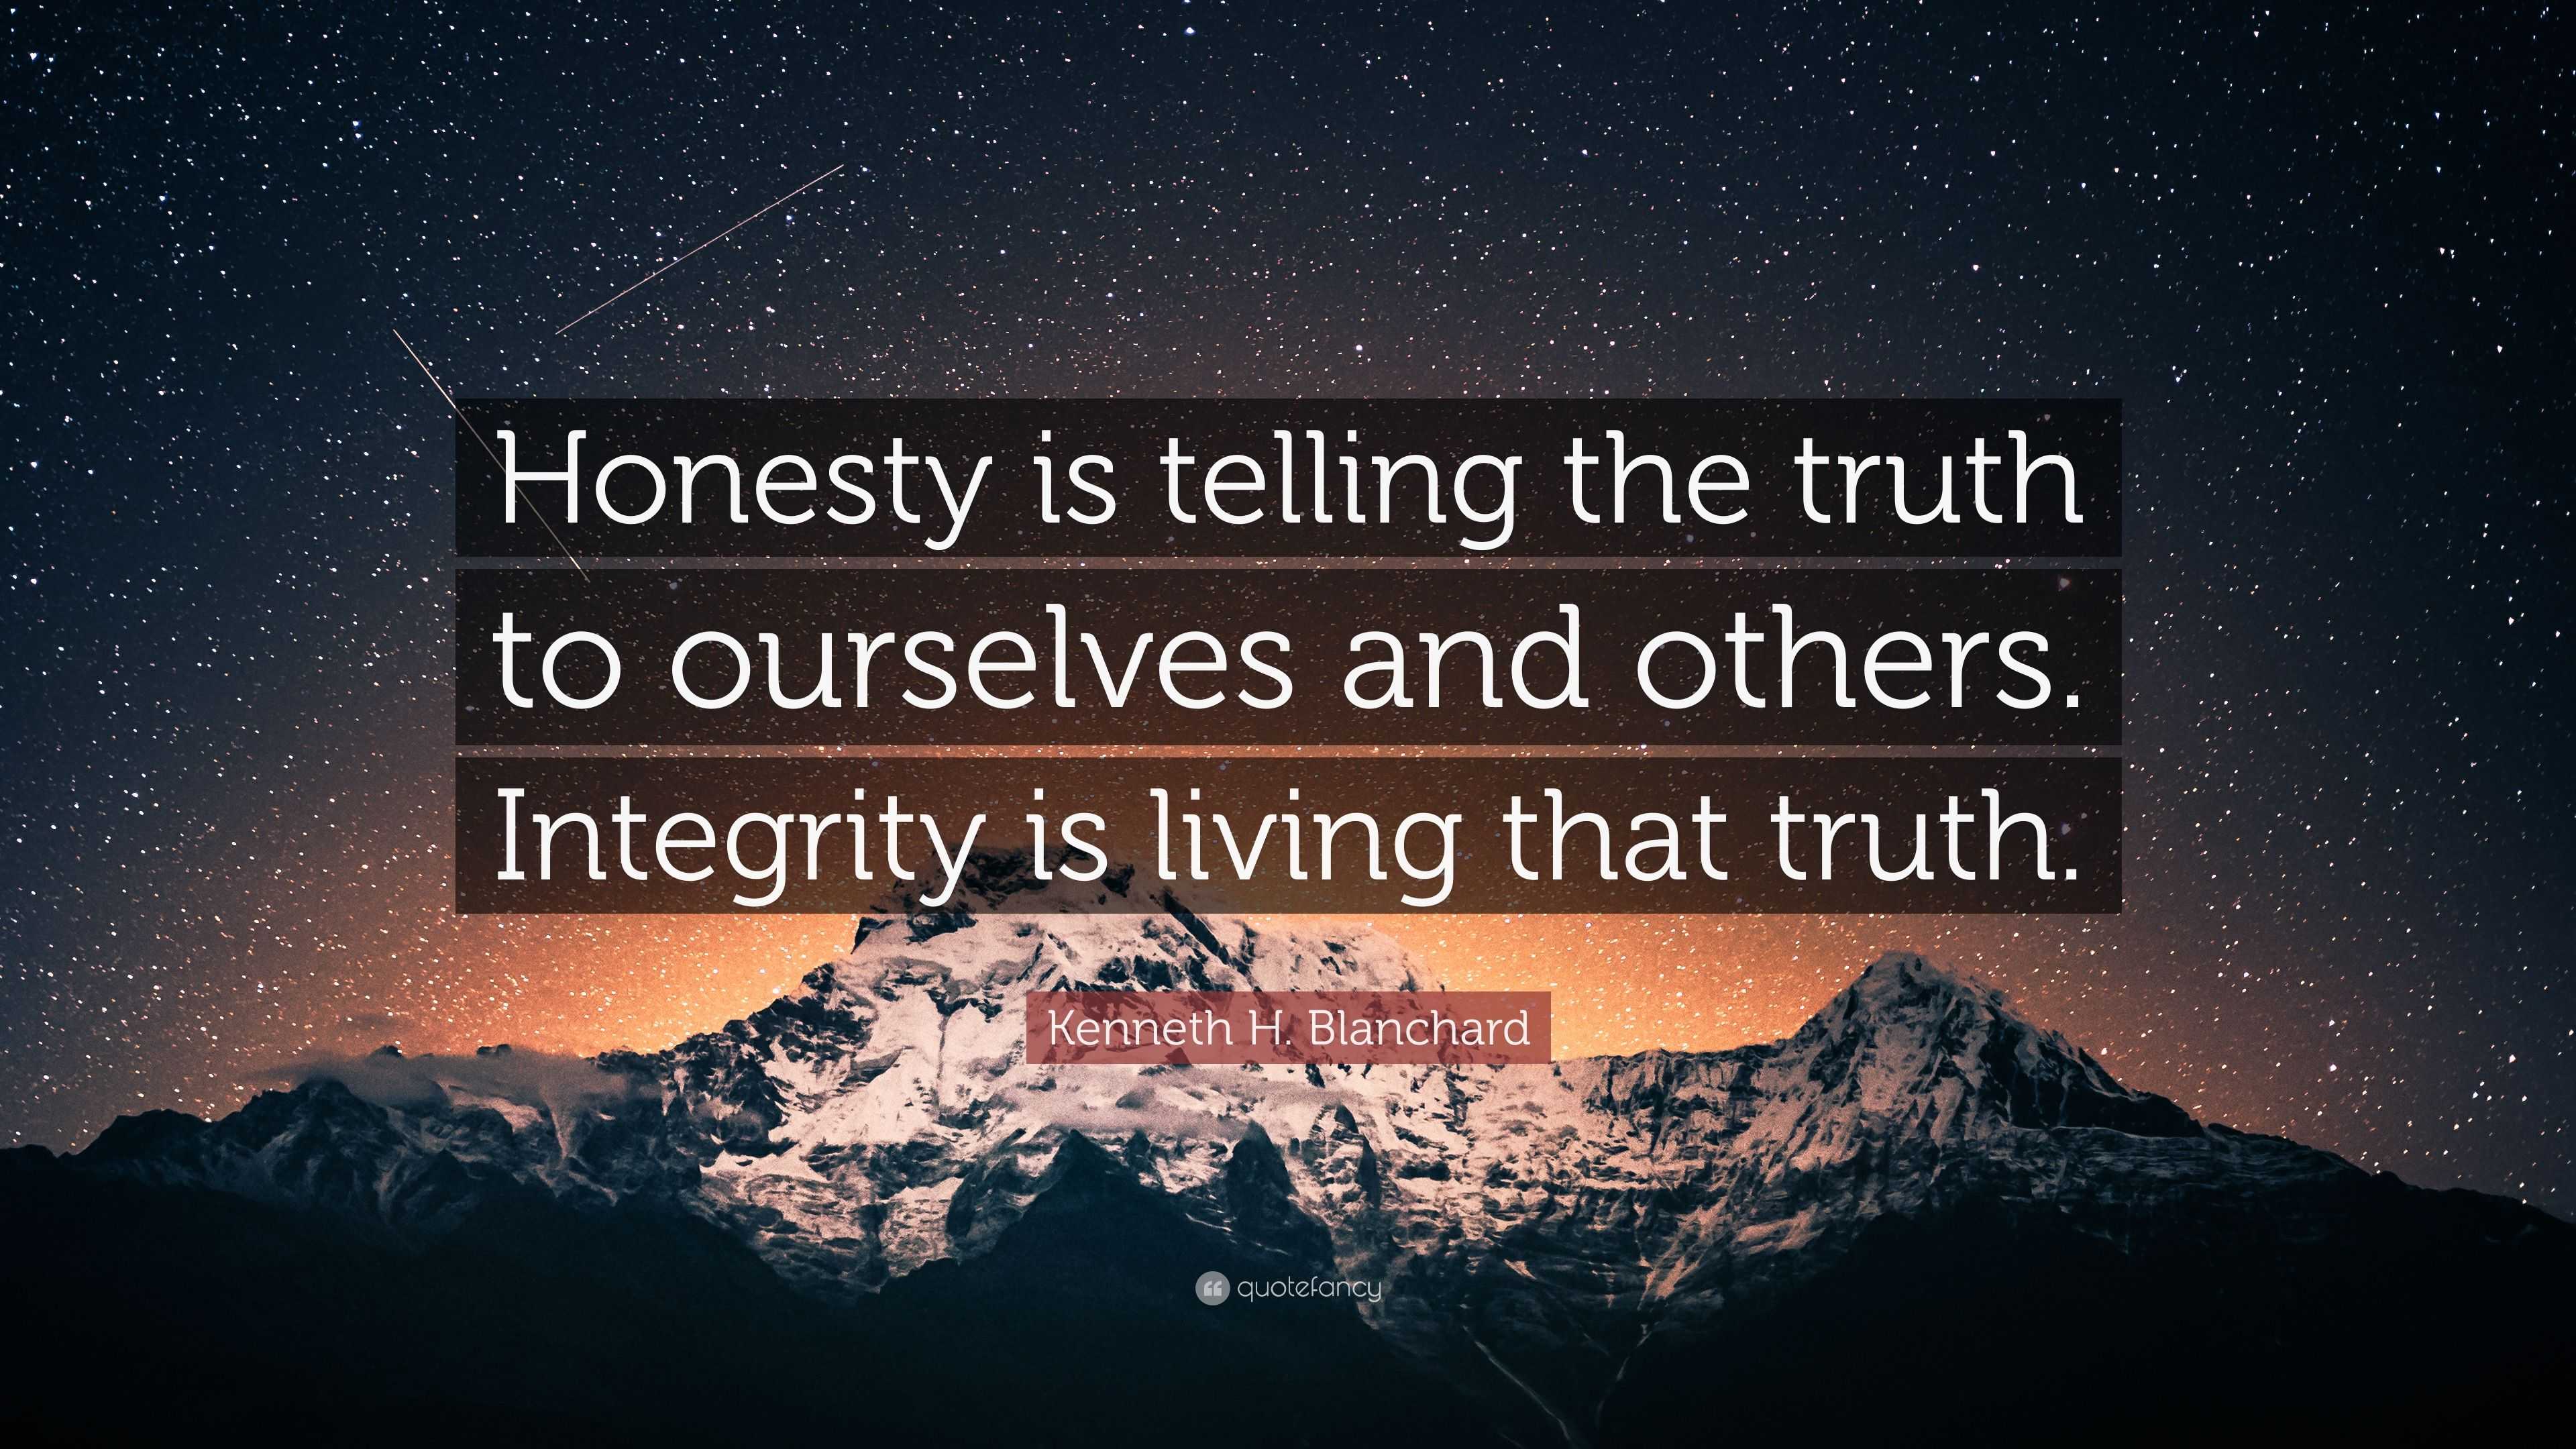 Kenneth H. Blanchard Quote: “Honesty is telling the truth to ourselves